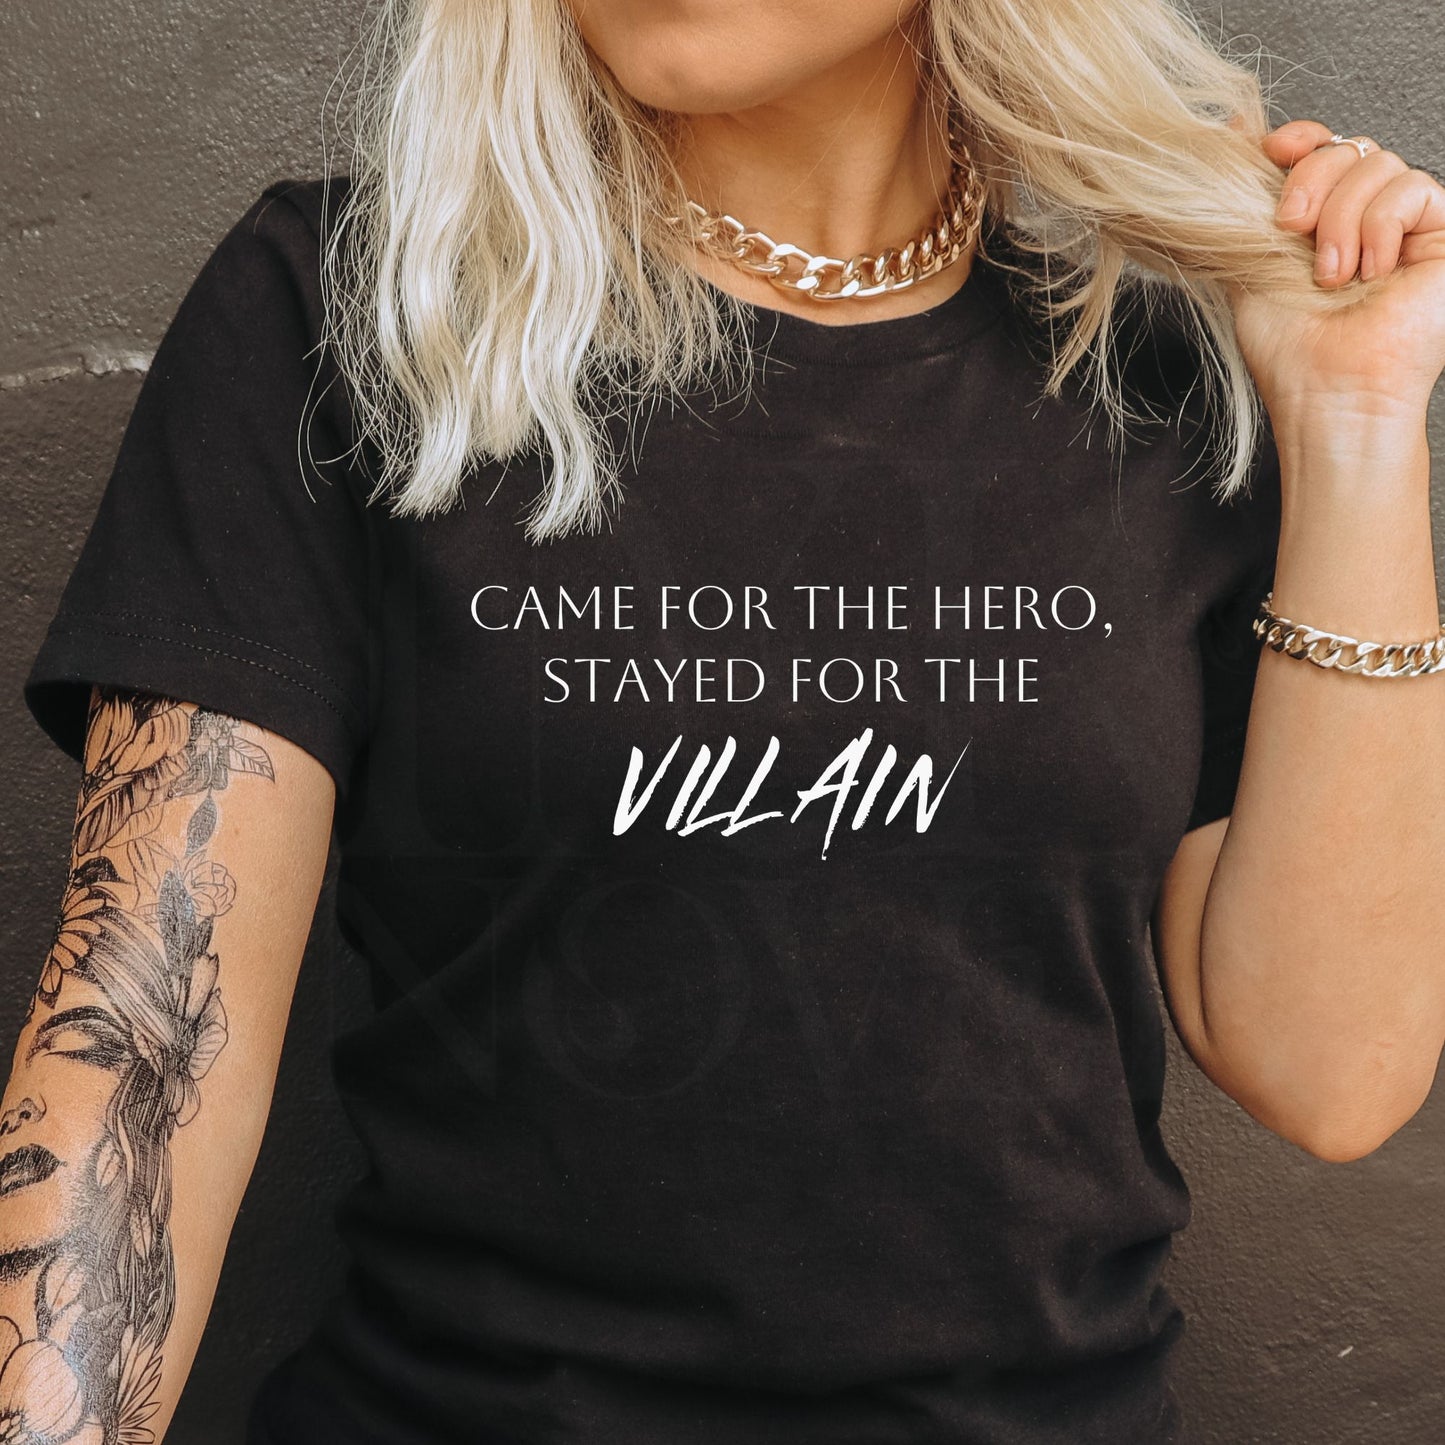 Came For The Hero, Stayed For The Villain T-Shirt